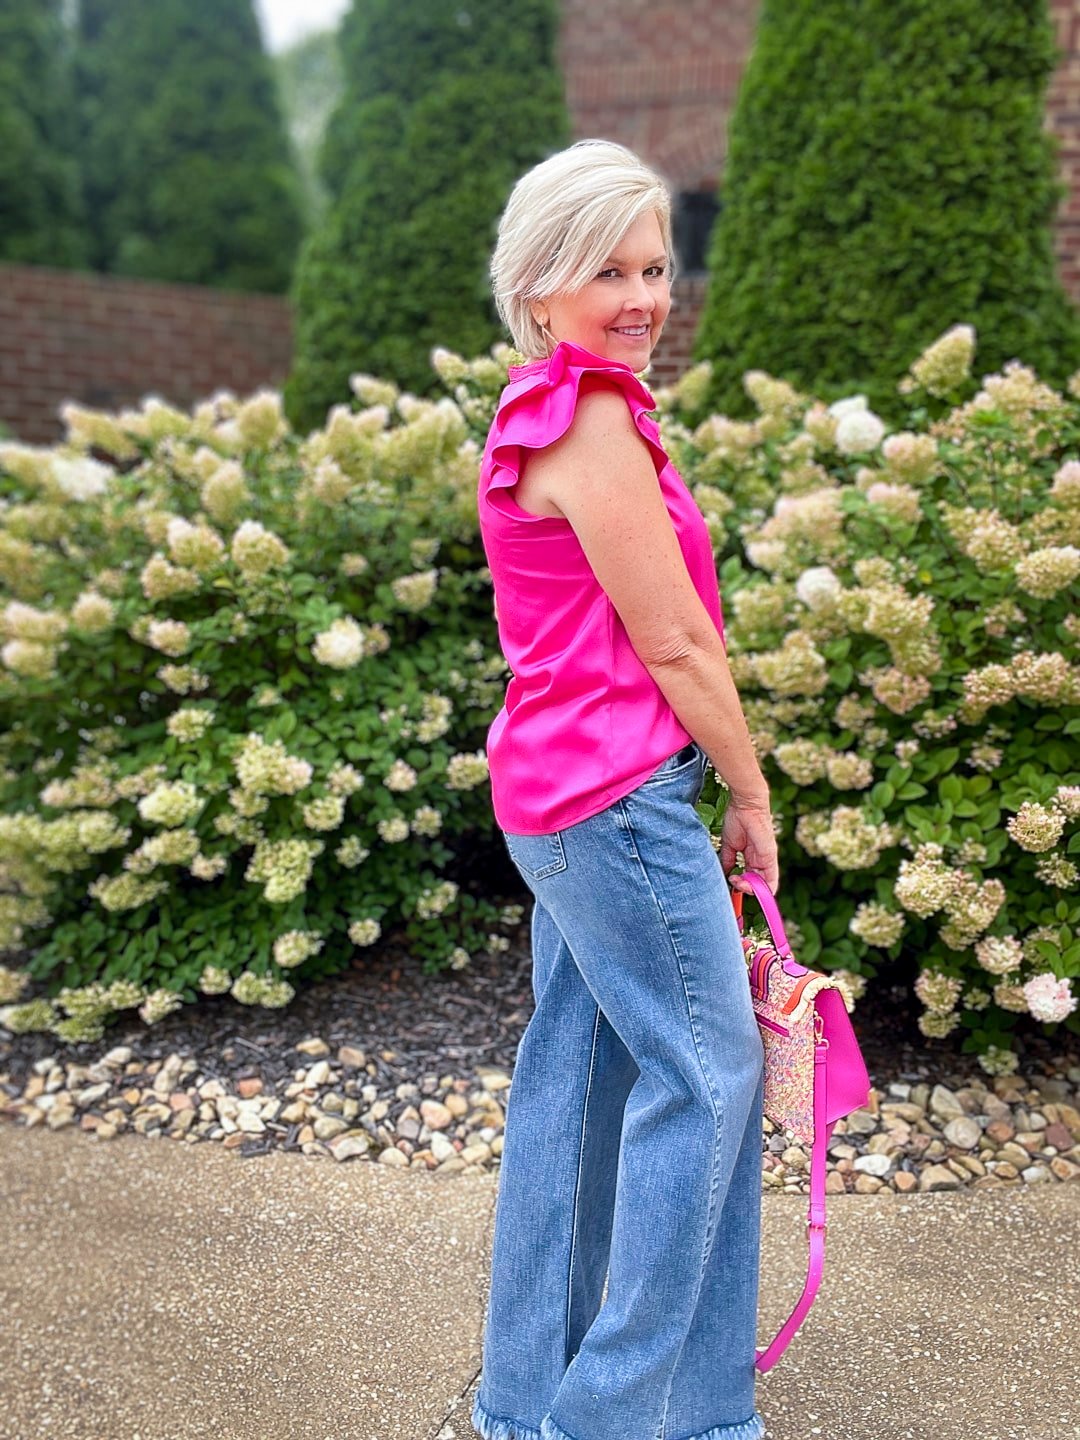 Over 40 Fashion Blogger, Tania Stephens is styling wide leg jeans with a pink ruffled top15